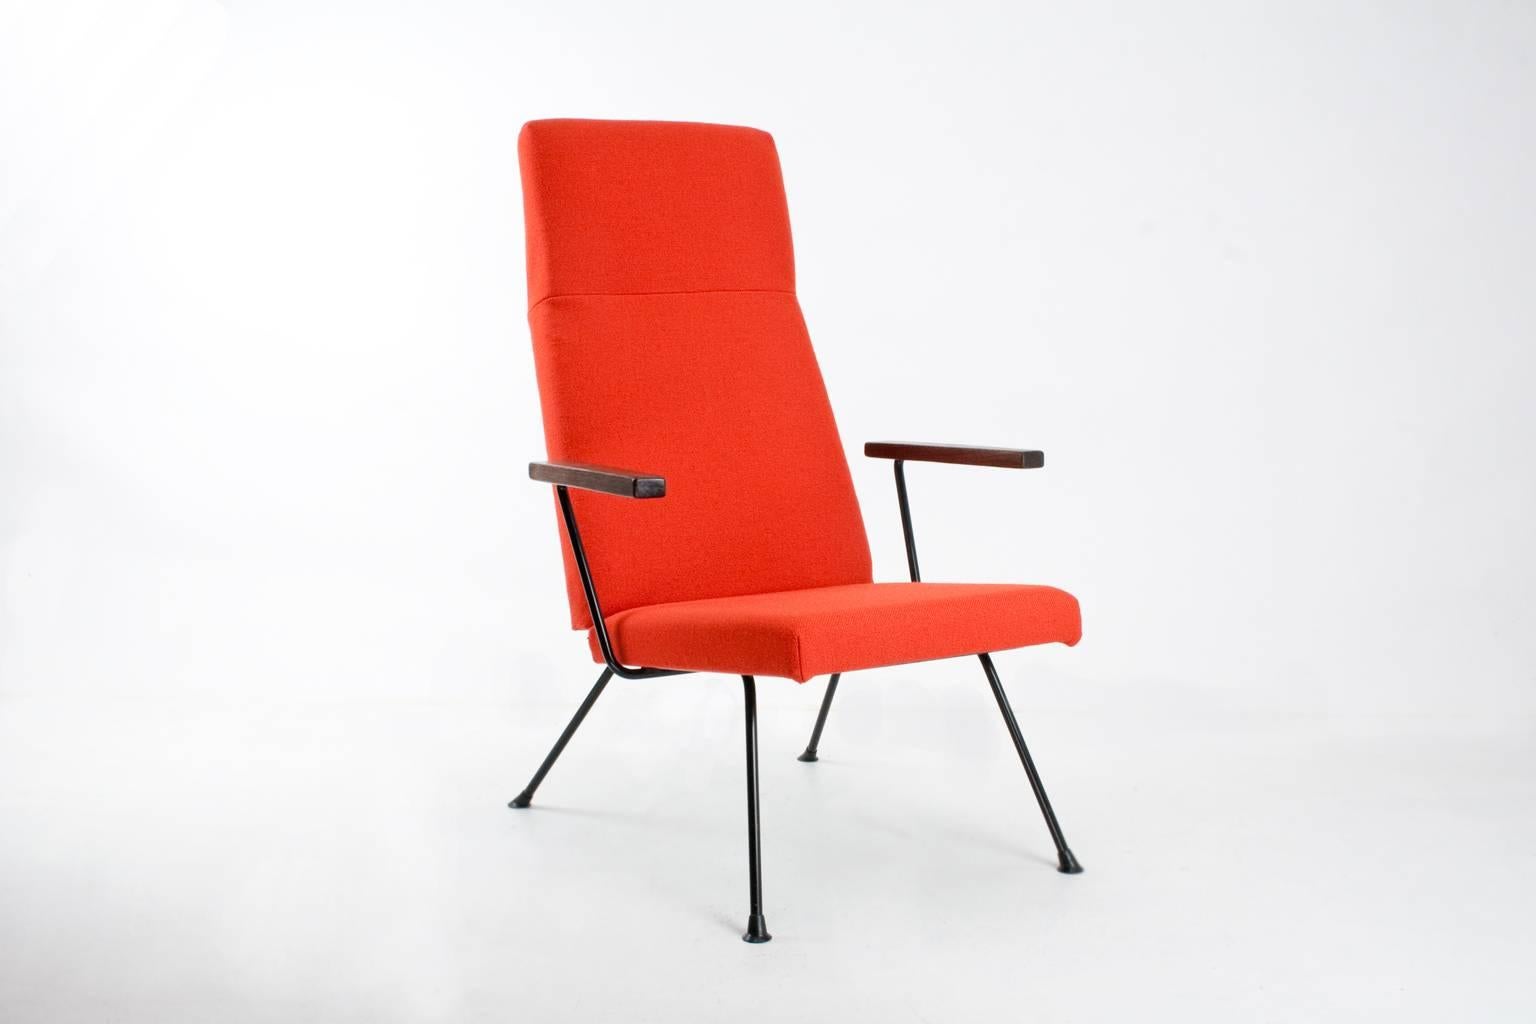 A.R. Cordemeyer 1410 Easy chair designed for Gispen in 1959. 

The chair has been recently upholstered in a bright red good quality, wool fabric, black metal frame and solid wenge armrests, all in very good condition. 

This model (1410) is